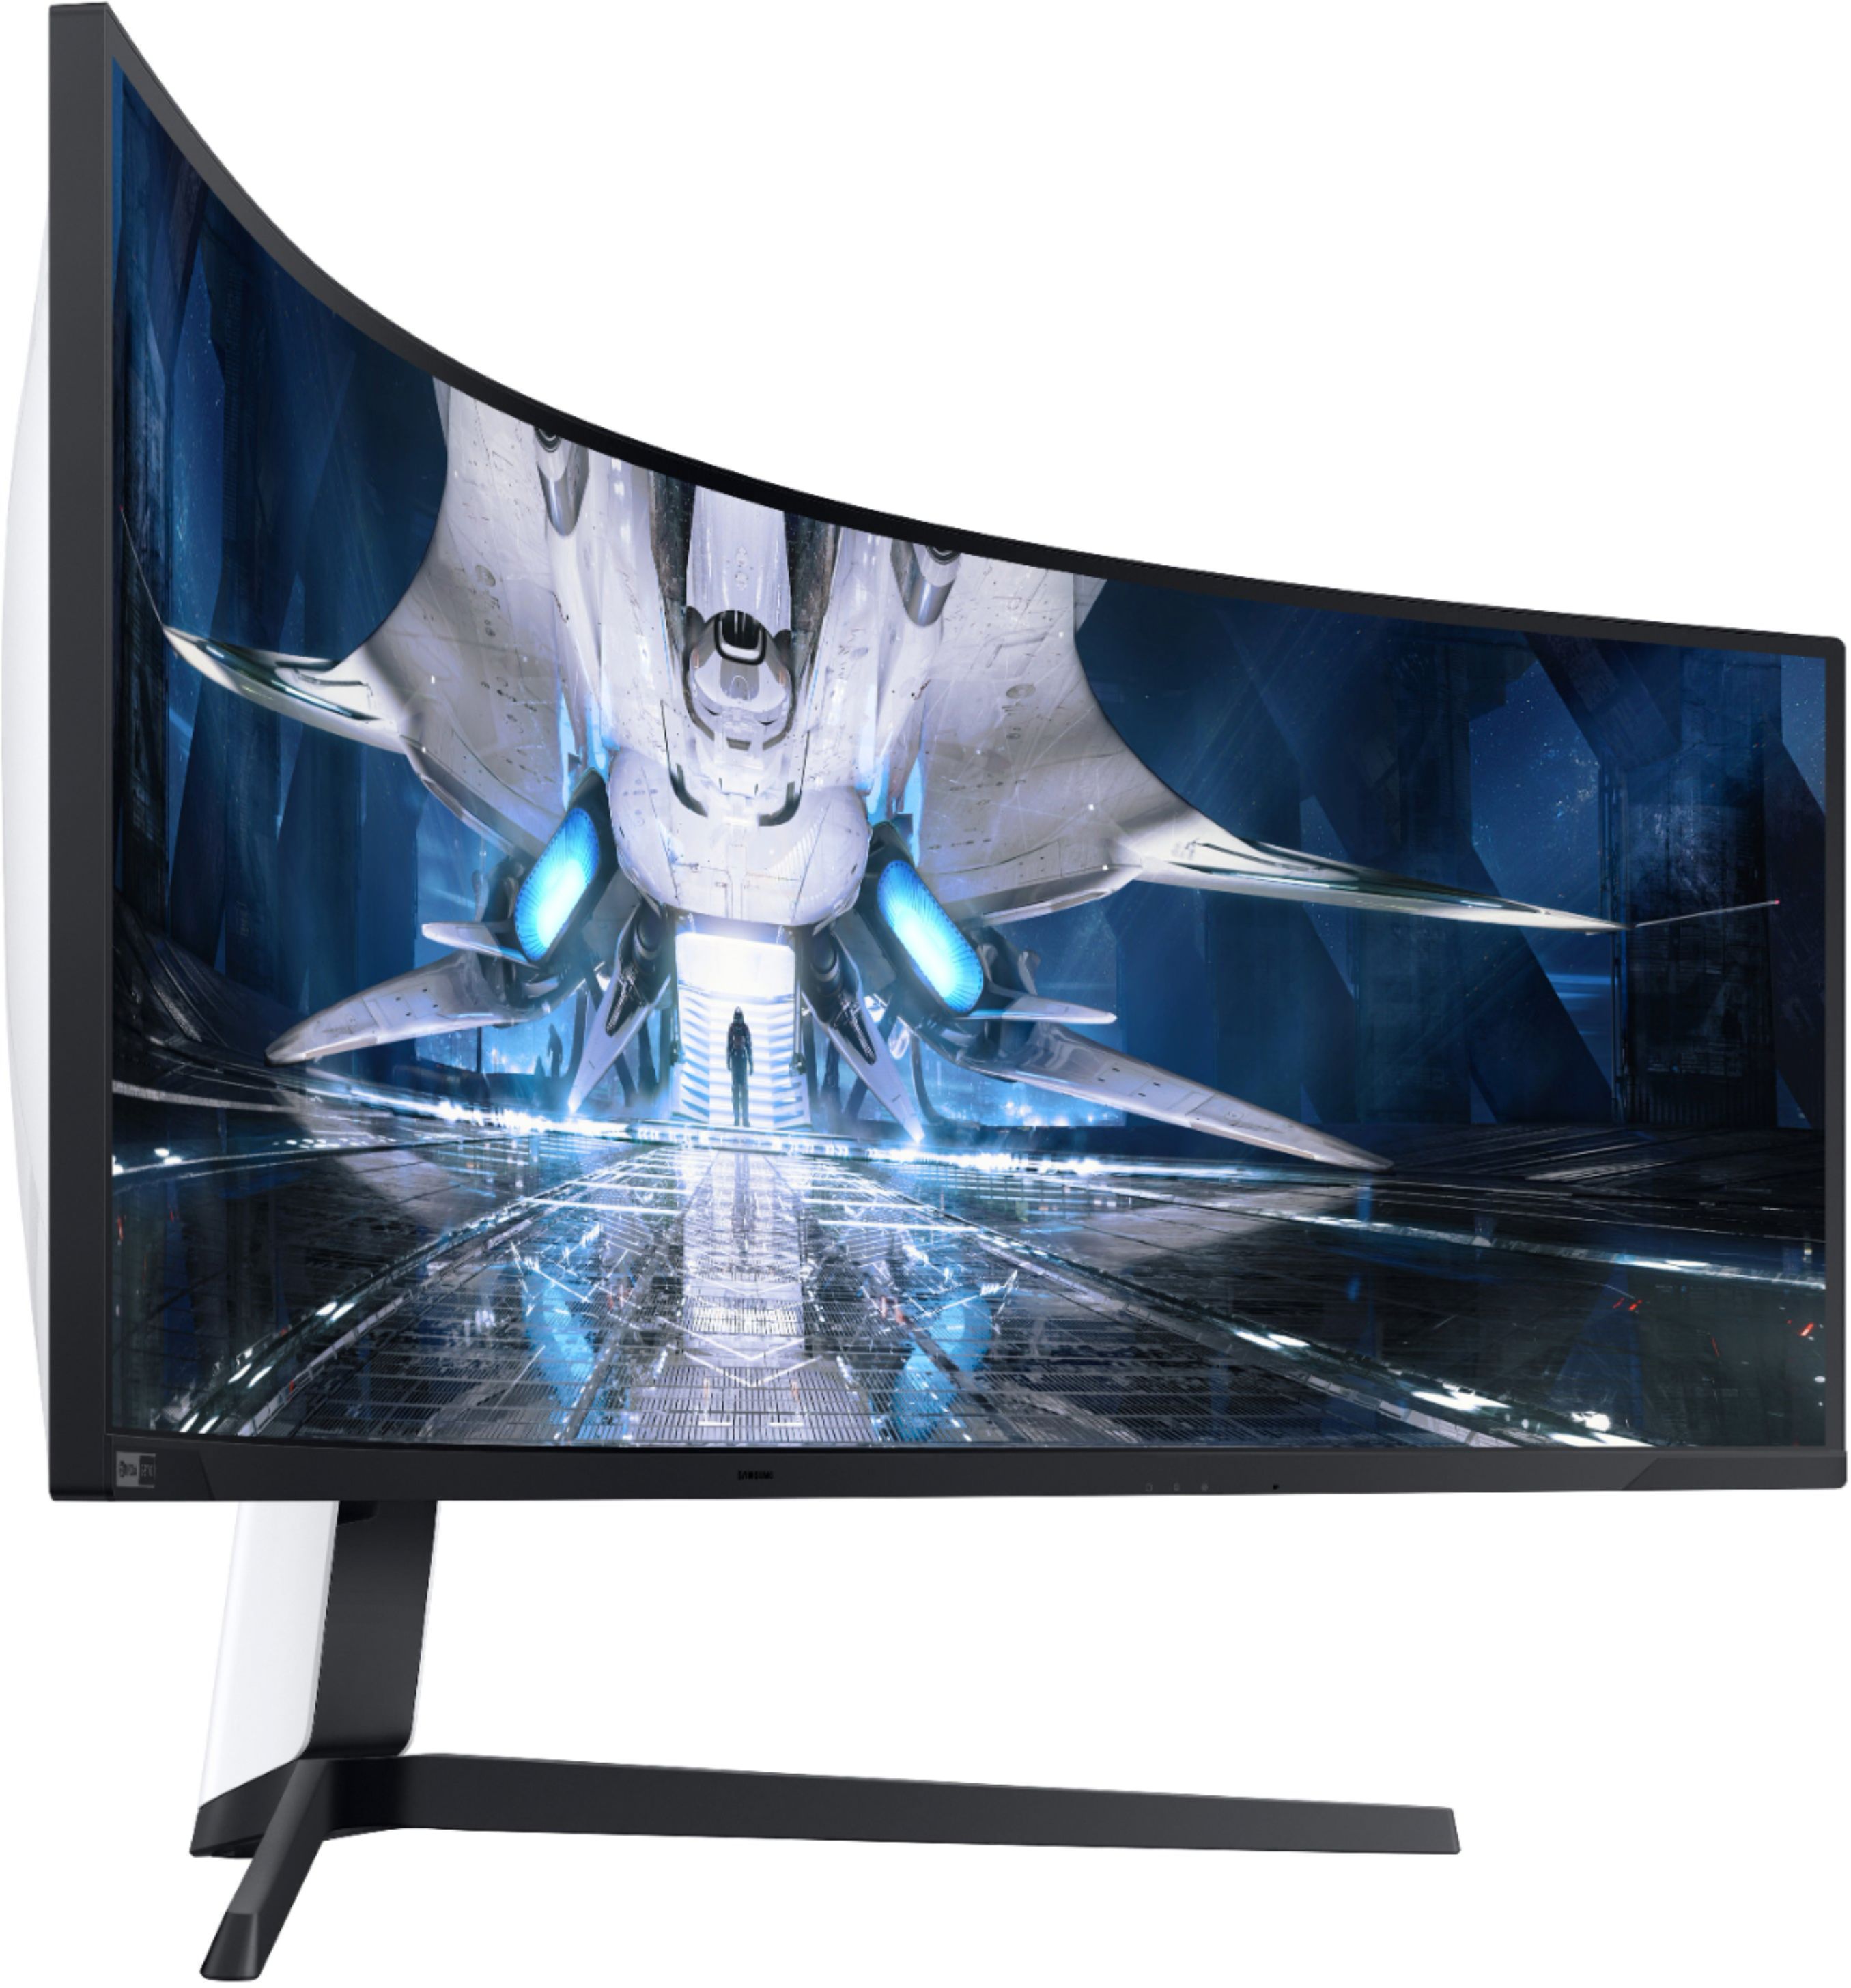 Samsung's 49-inch Odyssey OLED G9 DQHD Gaming Monitor Hits Preorder for  $2,200